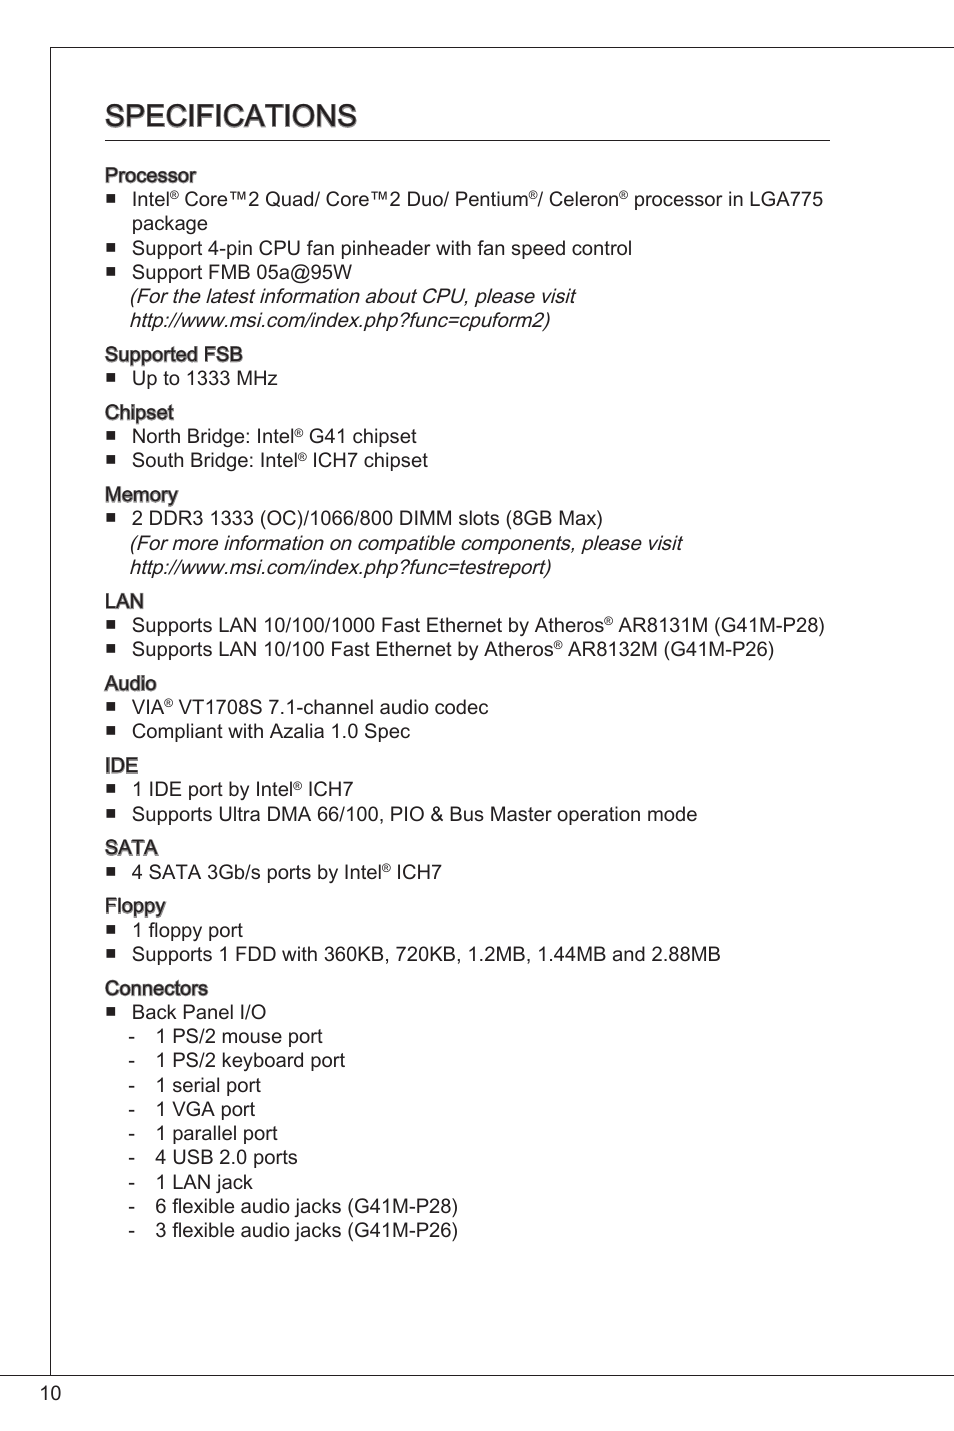 Specifications | MSI G41M-P26 User Manual | Page 10 / 155